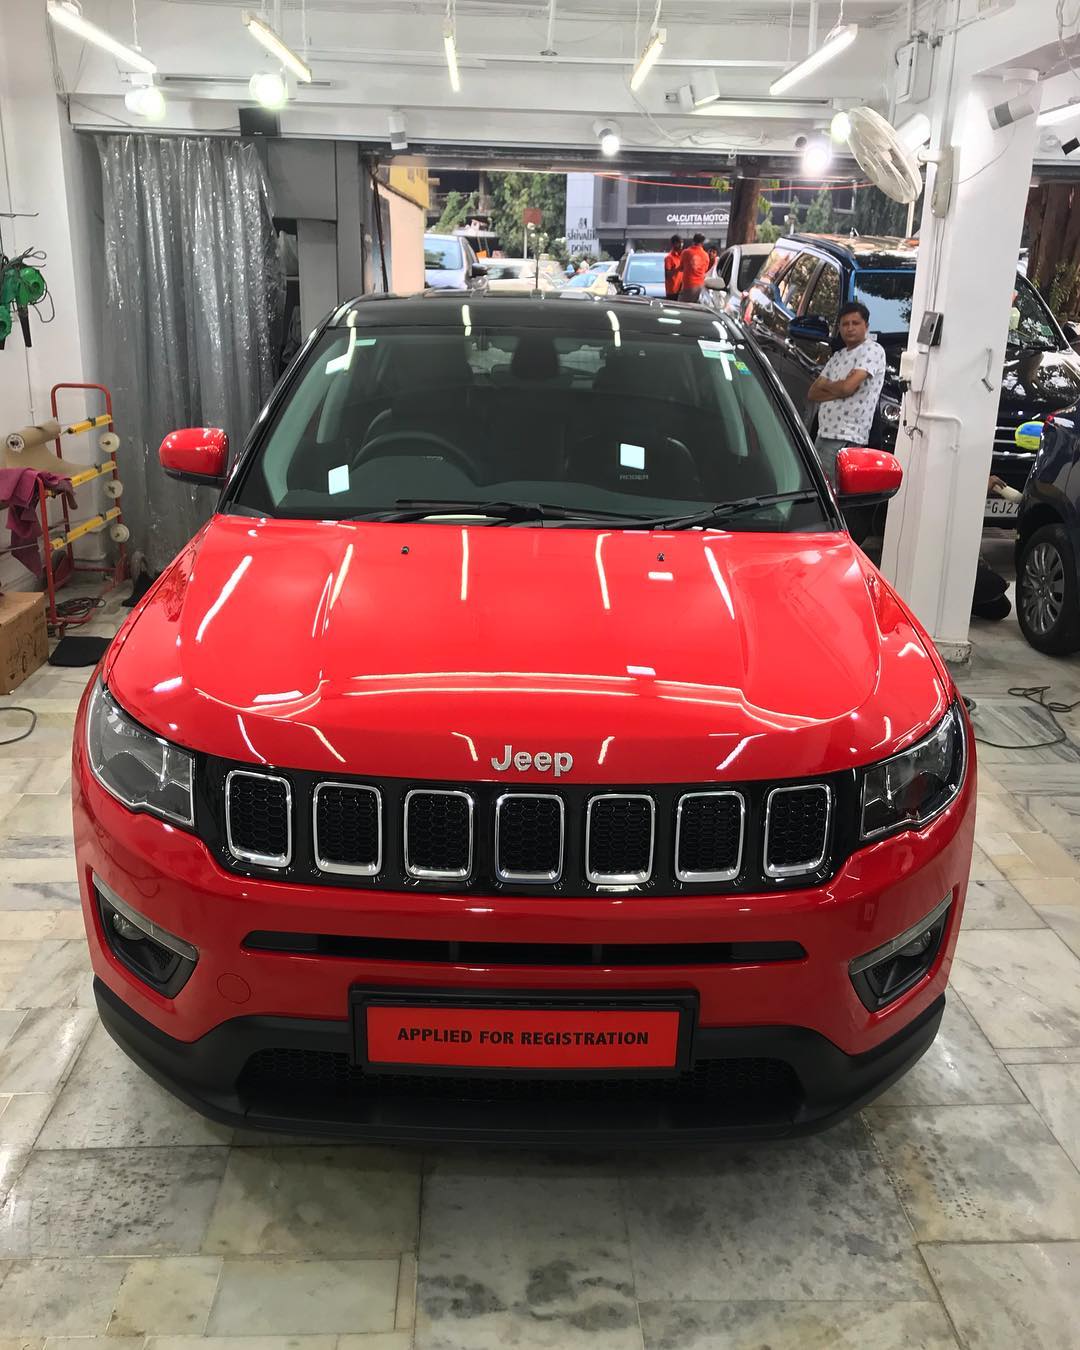 Creative Motors,  JEEP, COMPASS, Red, Best, Ceramic, Creative, Motors’’, Ceramic, Benefits:, creativemotors, bikes, bikers, Cars, carspa, microdetailing, ceramiccoatings, coatings, glasscoatings, waterrepellant, scratchproof, minicooper, supercars, Rajkot, ahmedabad, Jeep, compass, qualityovereverything